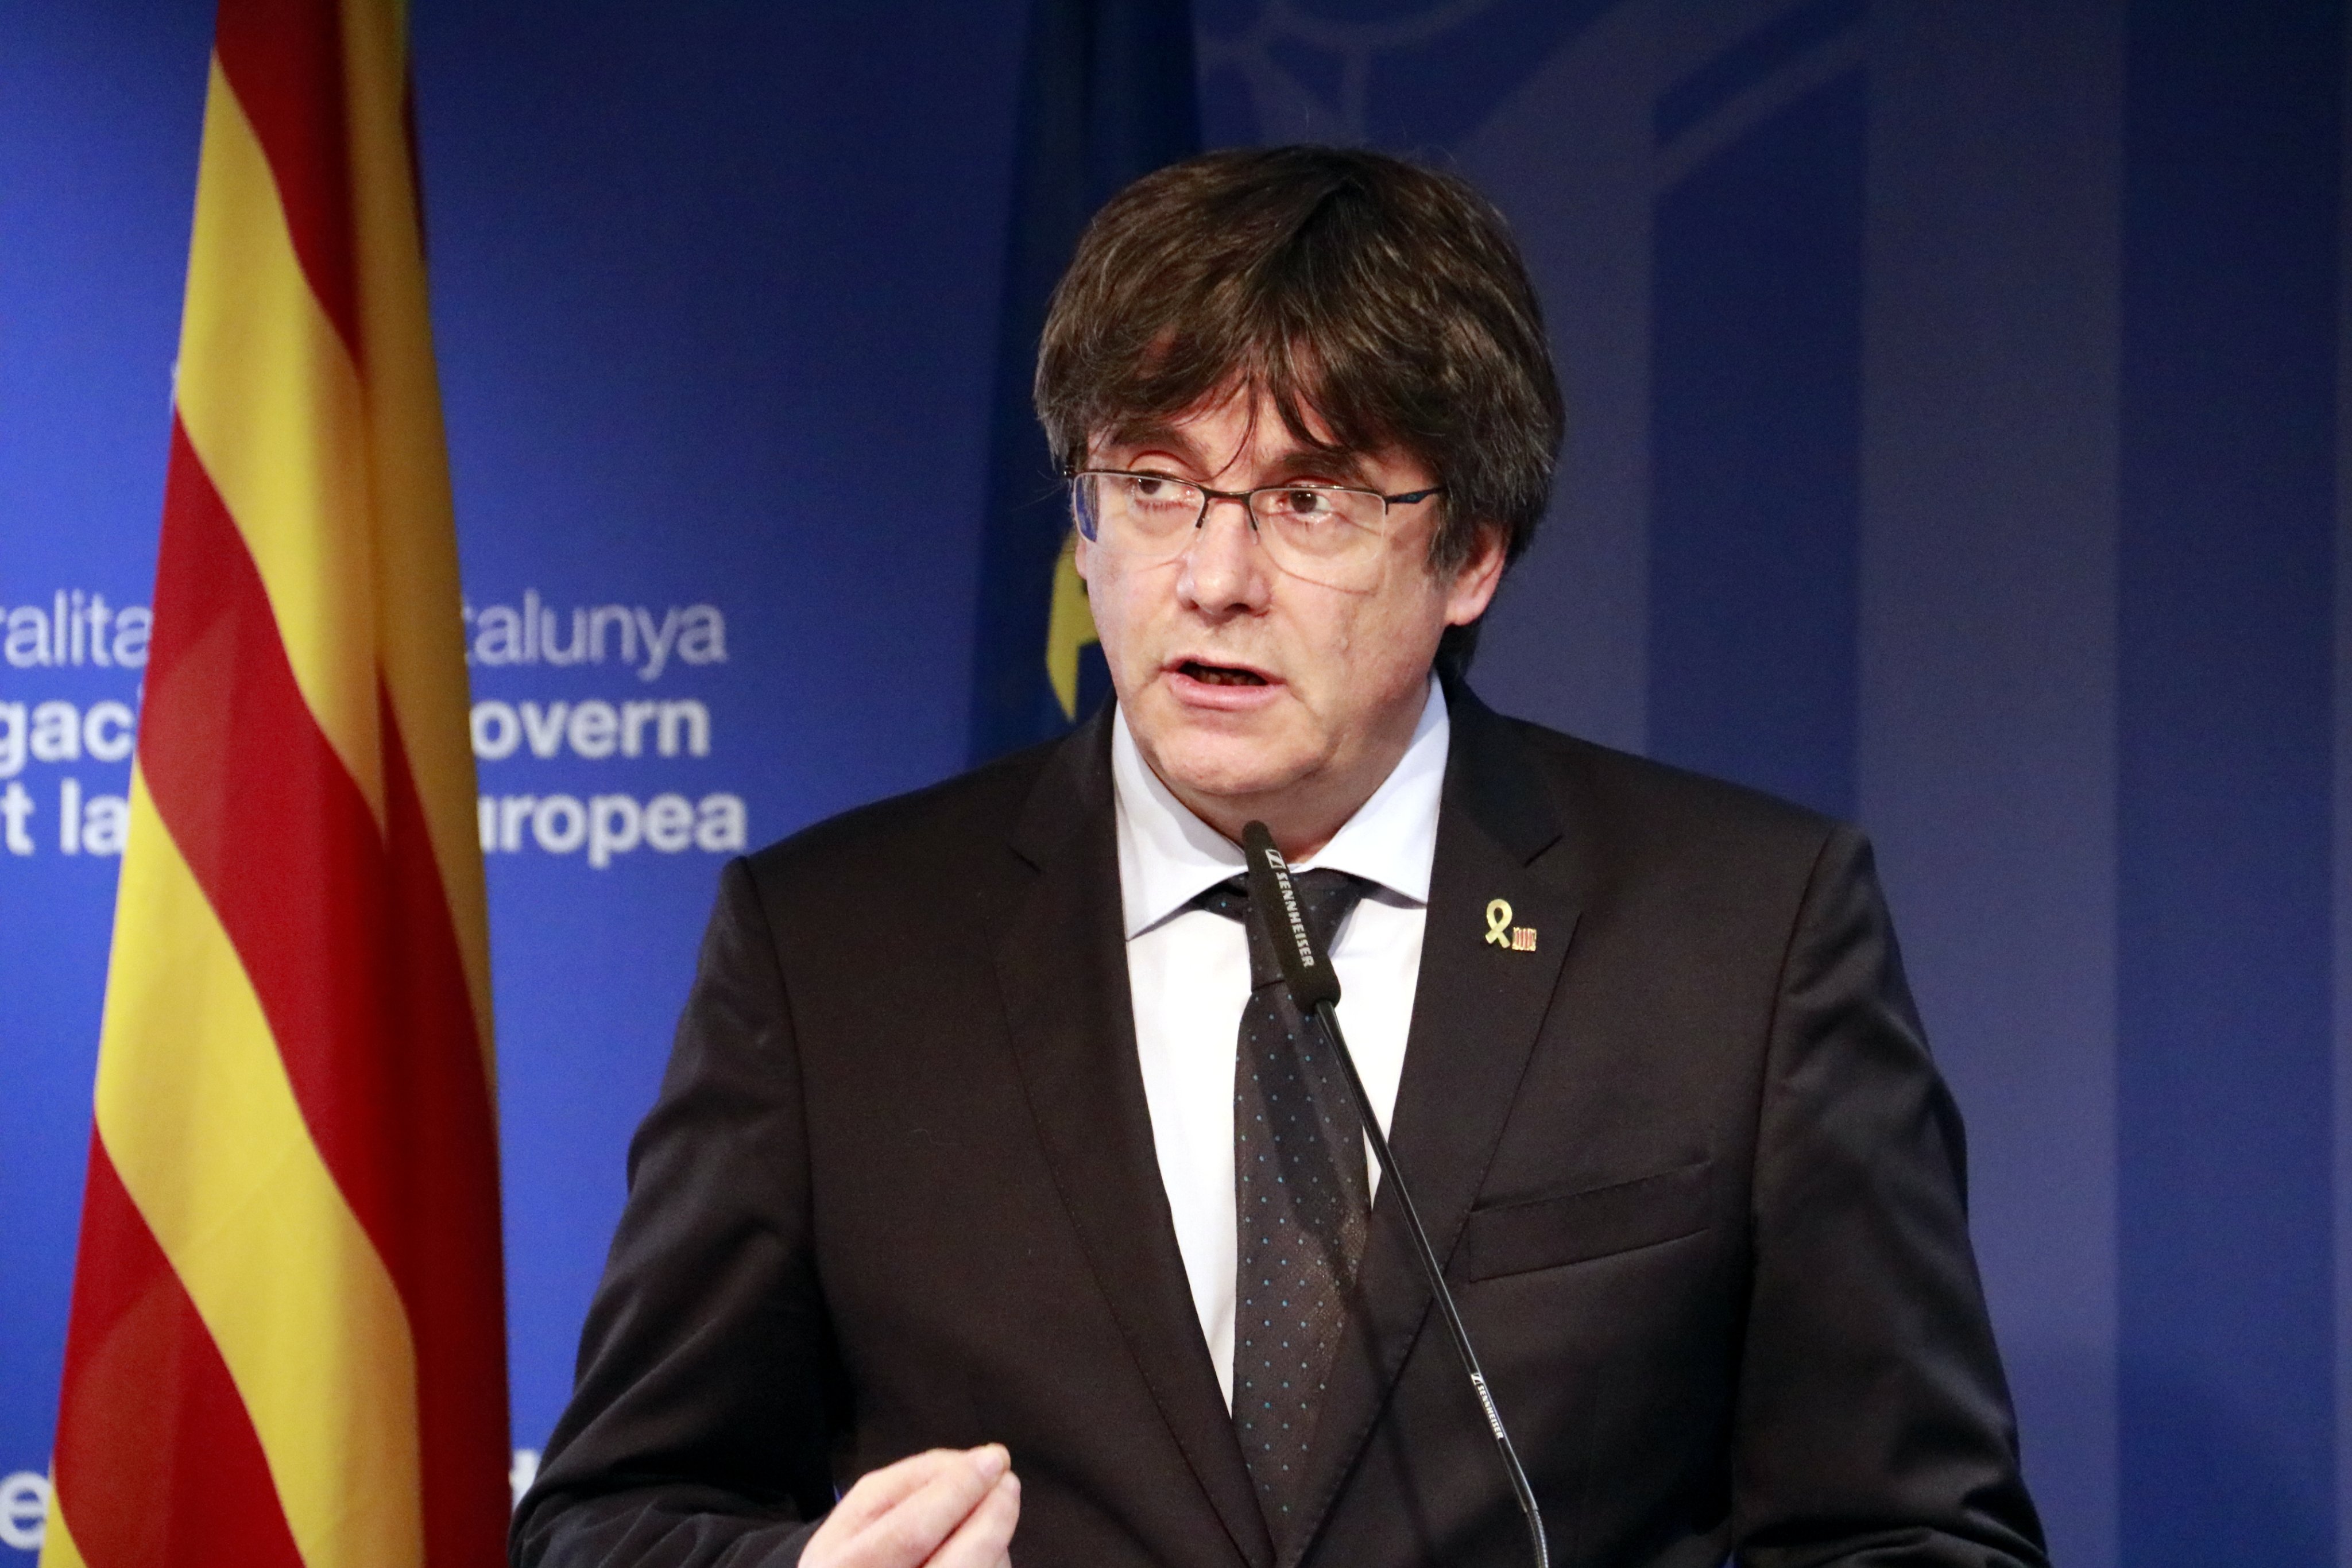 European Parliament lifts entry ban on Puigdemont and Comín